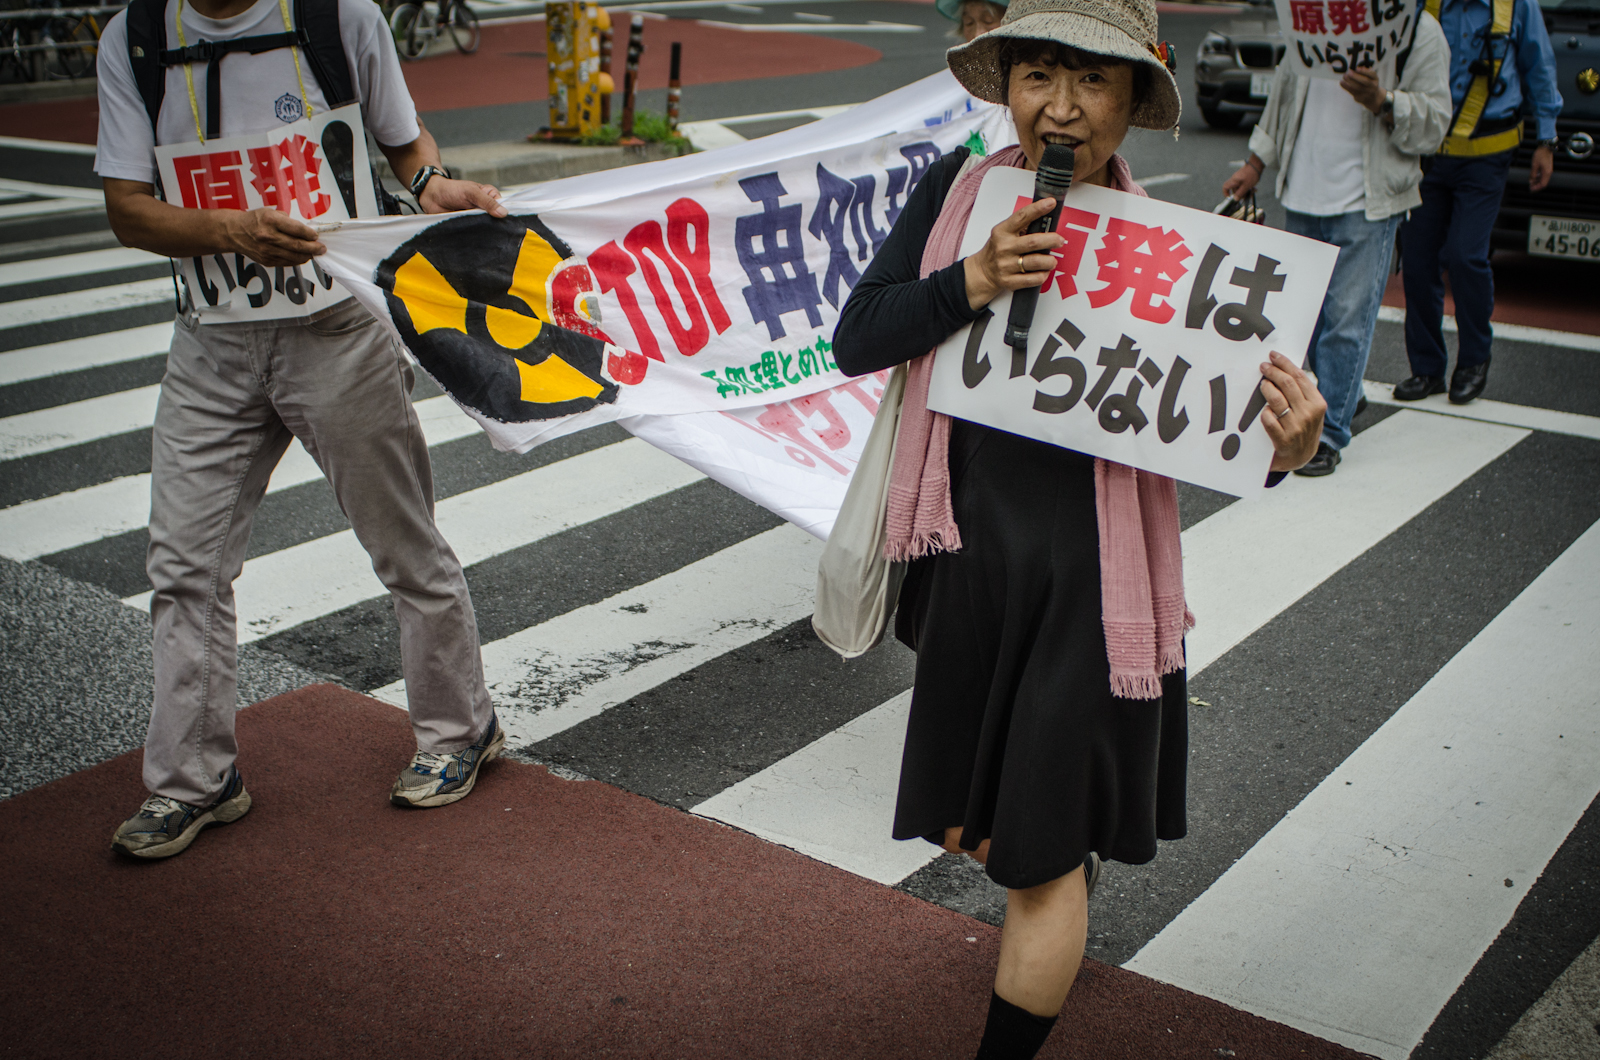 Press right for images of the anti-nuclear protest